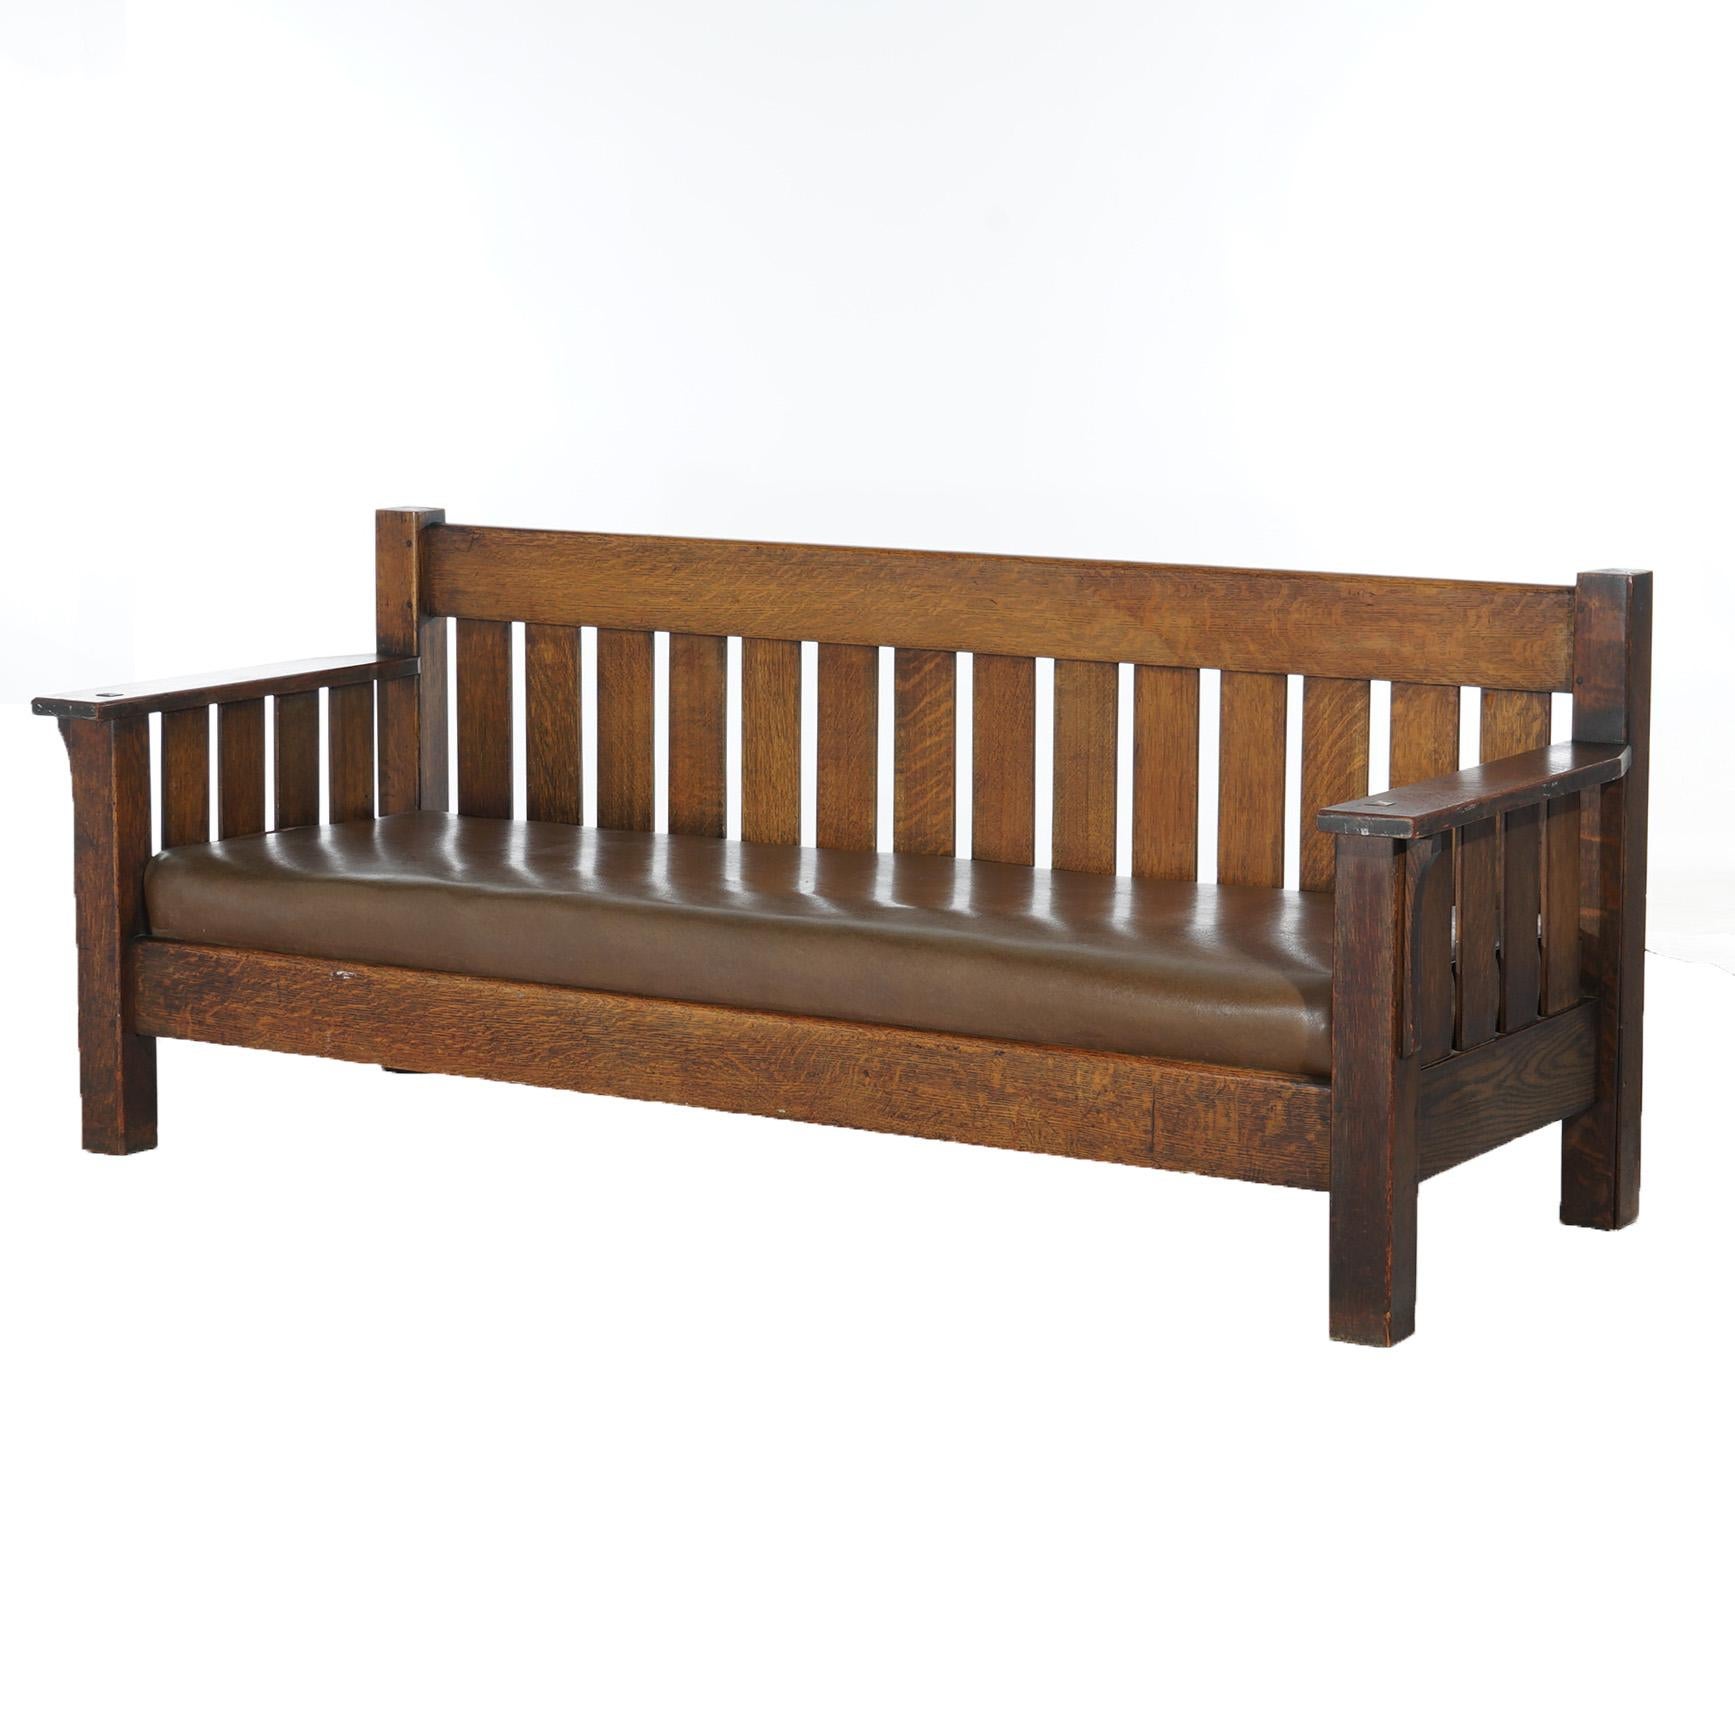 ***Ask About Reduced In-House Delivery Rates - Reliable Professional Service & Fully Insured***

Arts & Crafts JM Young Mission Oak Slat-Back Settle with Cushion, C1910

Measures - 33.5